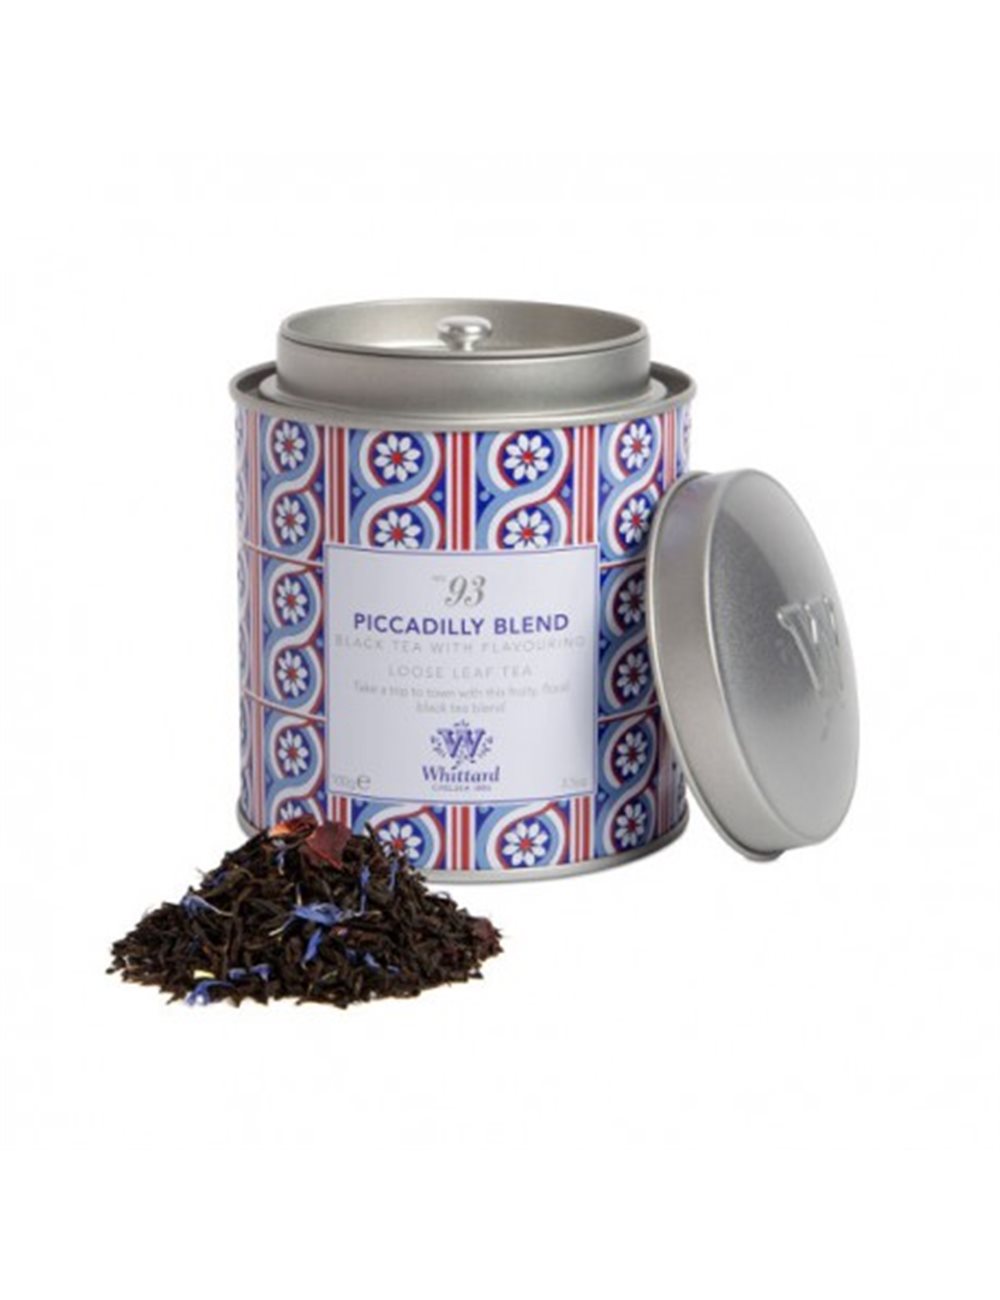 Tea Discoveries - losse thee caddy Piccadilly Blend 100g